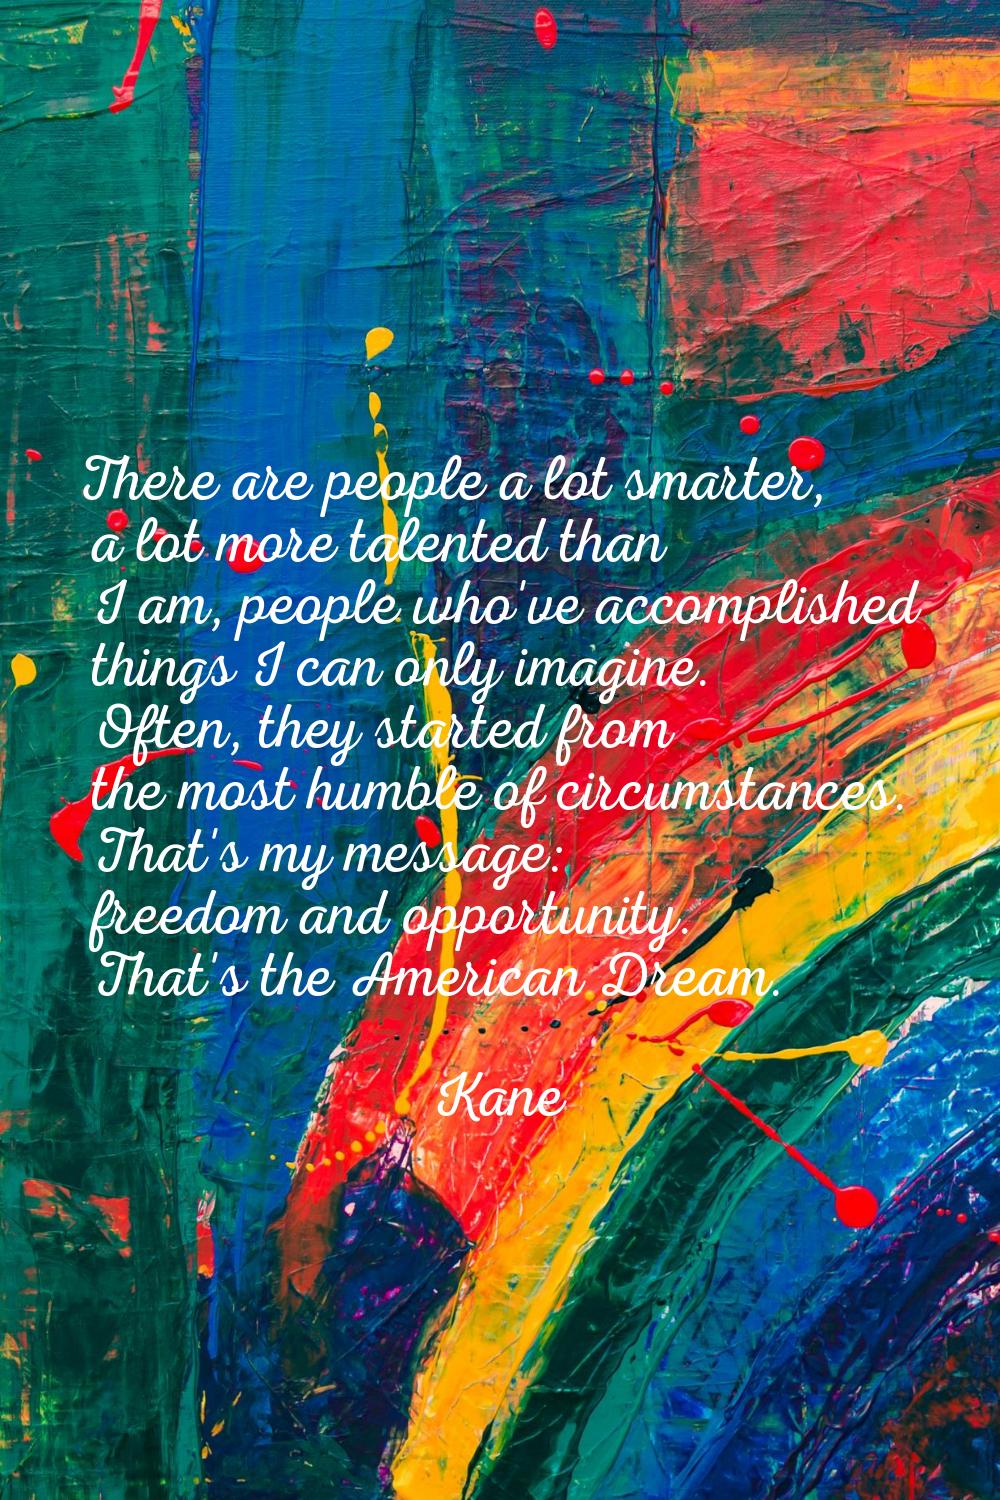 There are people a lot smarter, a lot more talented than I am, people who've accomplished things I 